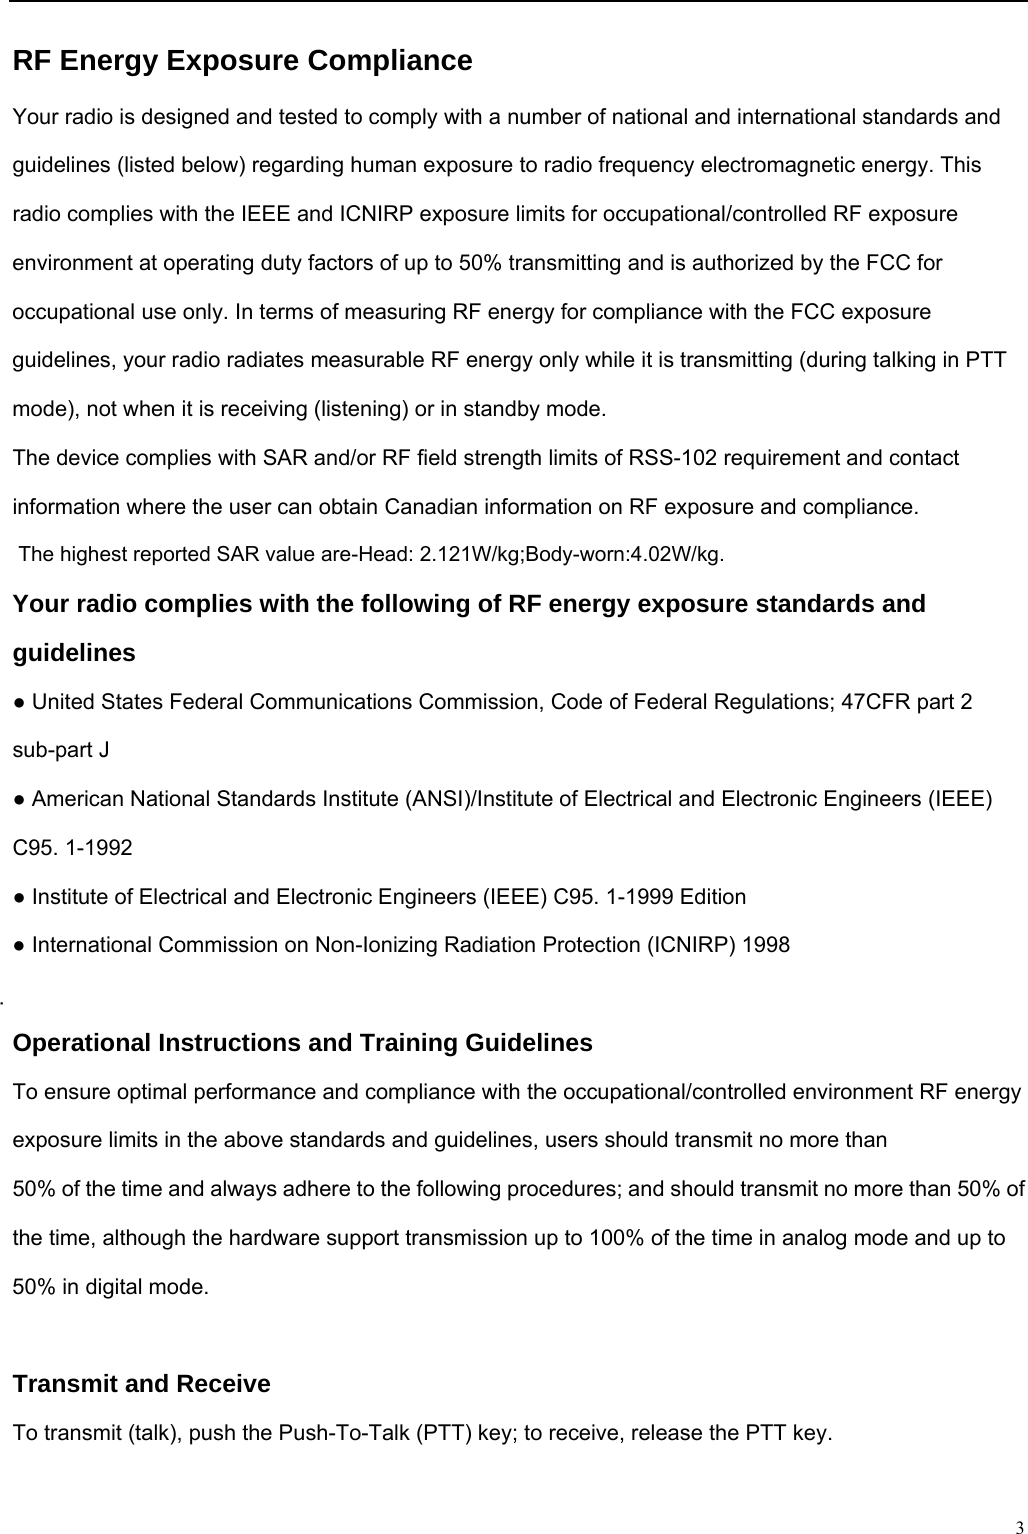                                                                                                              3RF Energy Exposure Compliance Your radio is designed and tested to comply with a number of national and international standards and guidelines (listed below) regarding human exposure to radio frequency electromagnetic energy. This radio complies with the IEEE and ICNIRP exposure limits for occupational/controlled RF exposure environment at operating duty factors of up to 50% transmitting and is authorized by the FCC for occupational use only. In terms of measuring RF energy for compliance with the FCC exposure guidelines, your radio radiates measurable RF energy only while it is transmitting (during talking in PTT mode), not when it is receiving (listening) or in standby mode. The device complies with SAR and/or RF field strength limits of RSS-102 requirement and contact information where the user can obtain Canadian information on RF exposure and compliance. The highest reported SAR value are-Head: 2.121W/kg;Body-worn:4.02W/kg. Your radio complies with the following of RF energy exposure standards and guidelines ● United States Federal Communications Commission, Code of Federal Regulations; 47CFR part 2 sub-part J ● American National Standards Institute (ANSI)/Institute of Electrical and Electronic Engineers (IEEE) C95. 1-1992 ● Institute of Electrical and Electronic Engineers (IEEE) C95. 1-1999 Edition ● International Commission on Non-Ionizing Radiation Protection (ICNIRP) 1998  Operational Instructions and Training Guidelines To ensure optimal performance and compliance with the occupational/controlled environment RF energy exposure limits in the above standards and guidelines, users should transmit no more than 50% of the time and always adhere to the following procedures; and should transmit no more than 50% of the time, although the hardware support transmission up to 100% of the time in analog mode and up to 50% in digital mode.  Transmit and Receive To transmit (talk), push the Push-To-Talk (PTT) key; to receive, release the PTT key.  